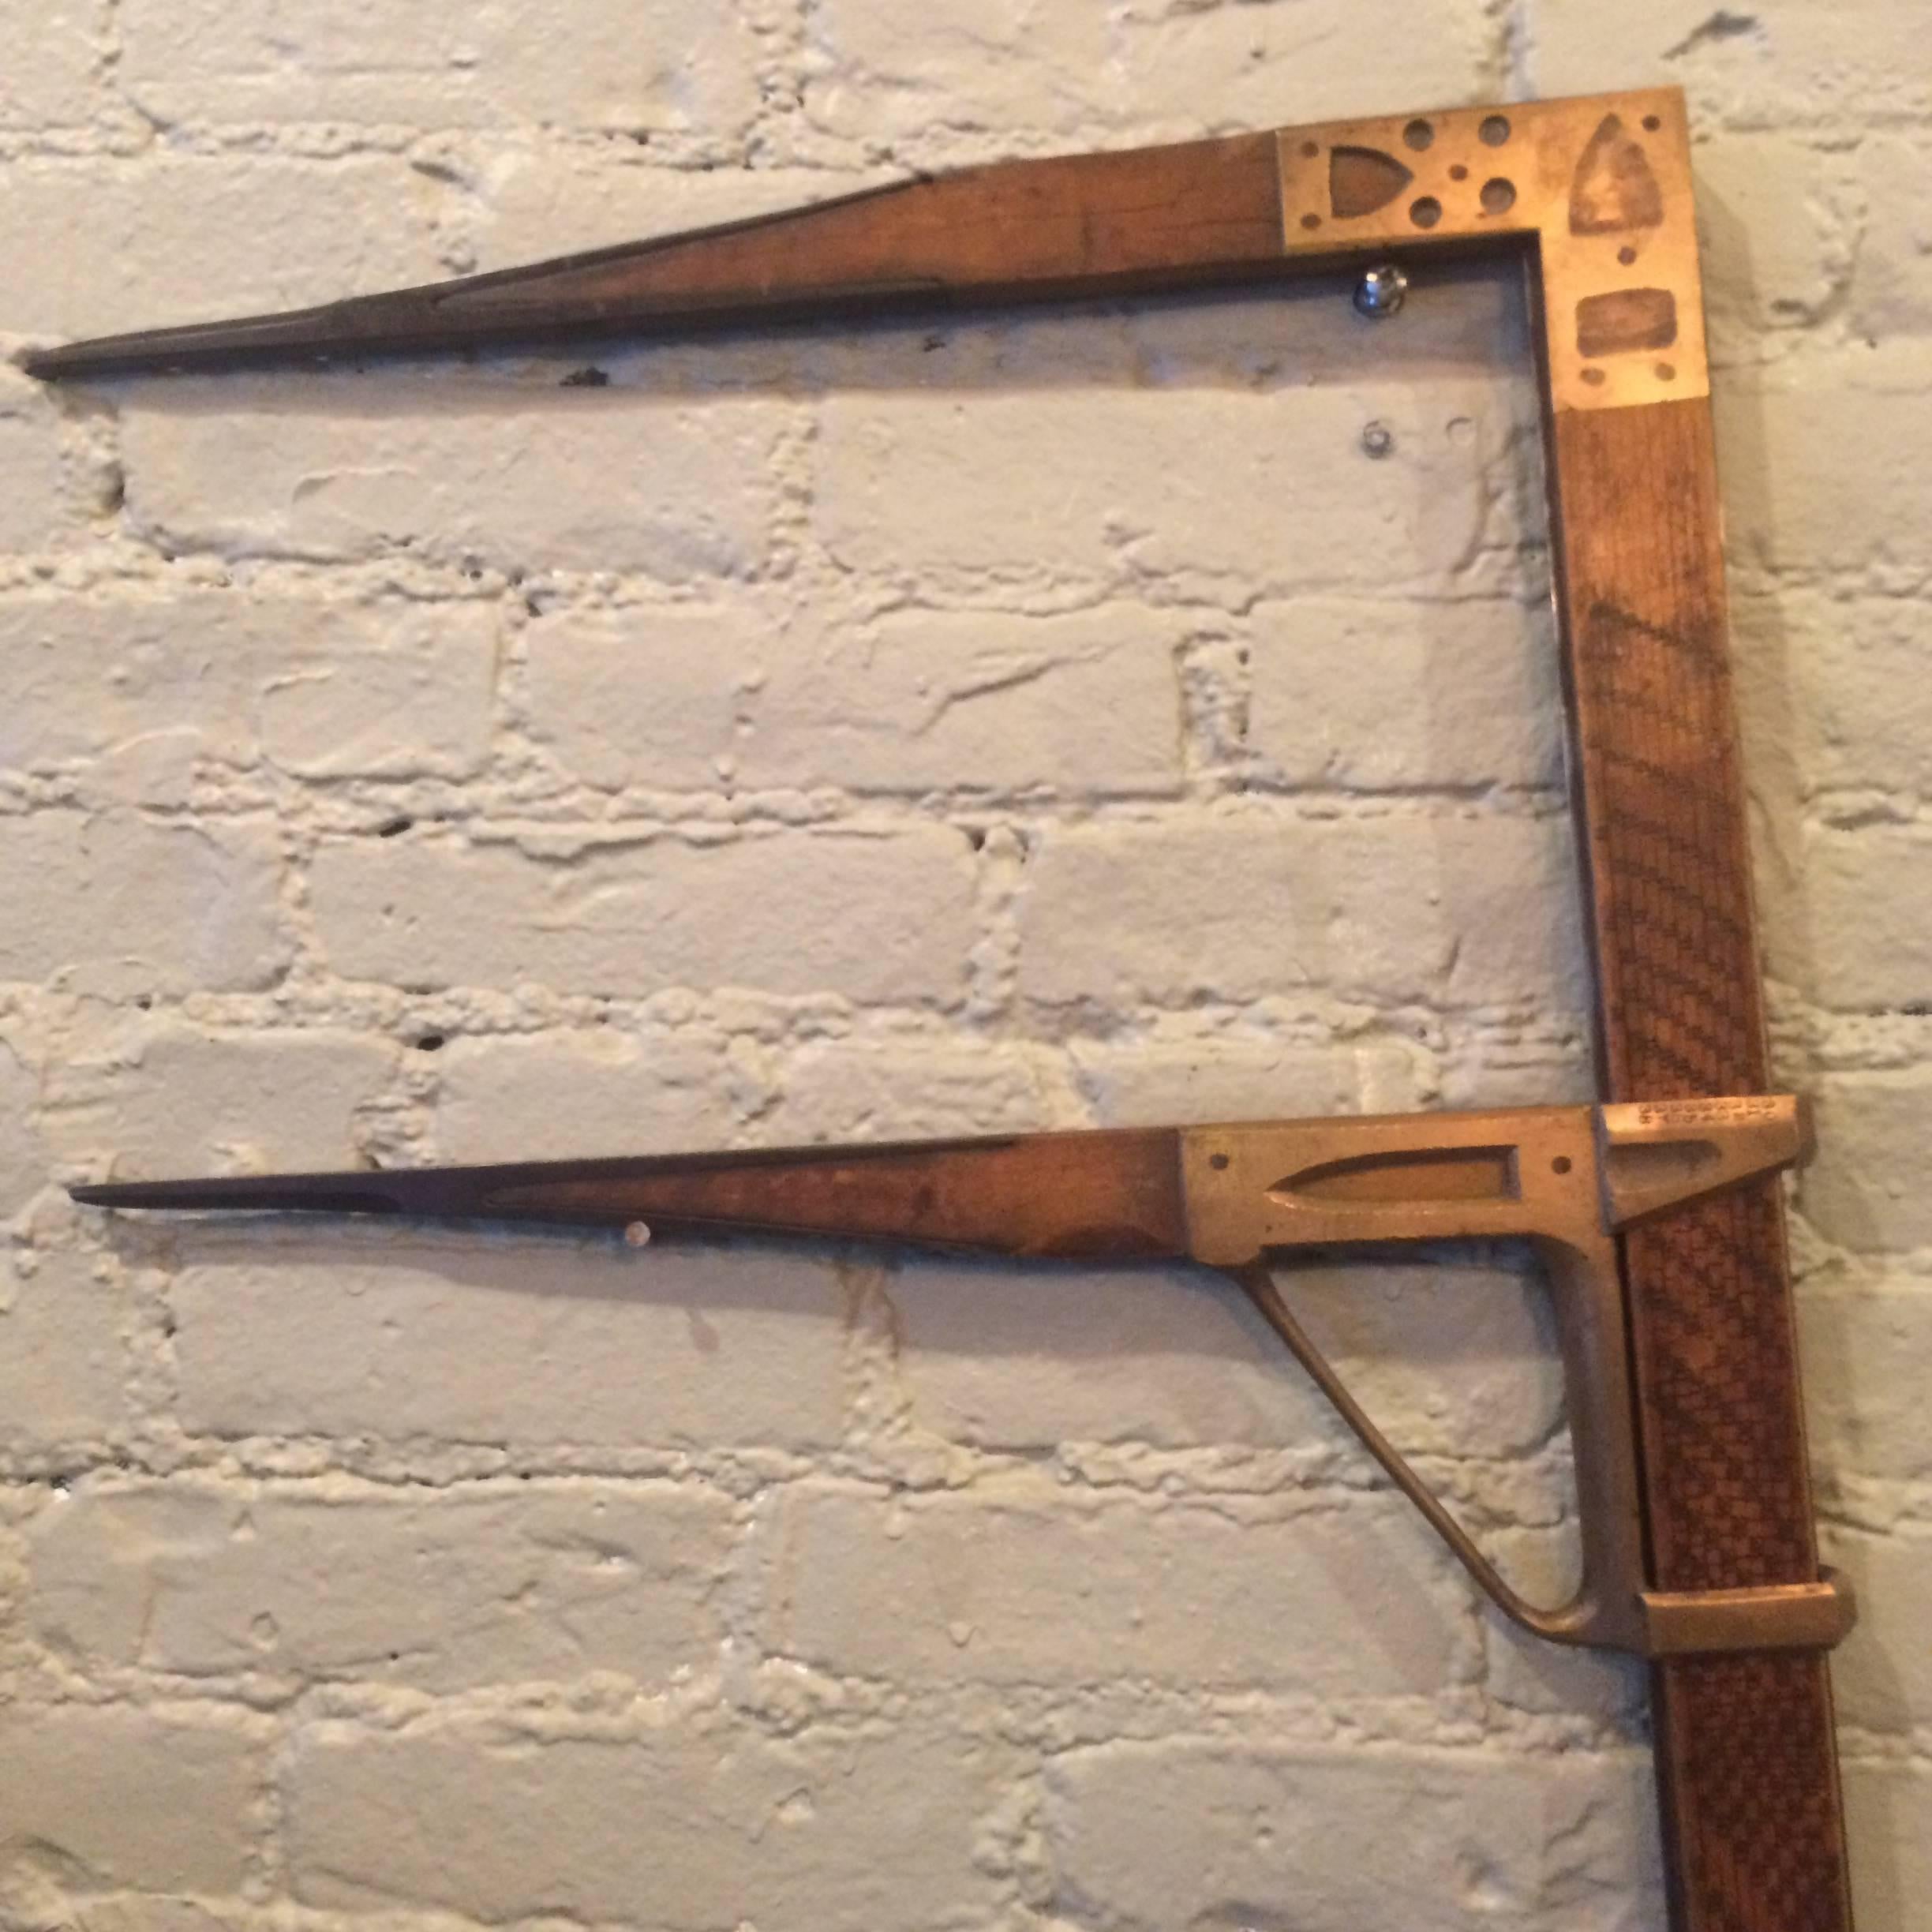 Early 20th century, wood lumber caliper with brass fittings by William Greenleaf.